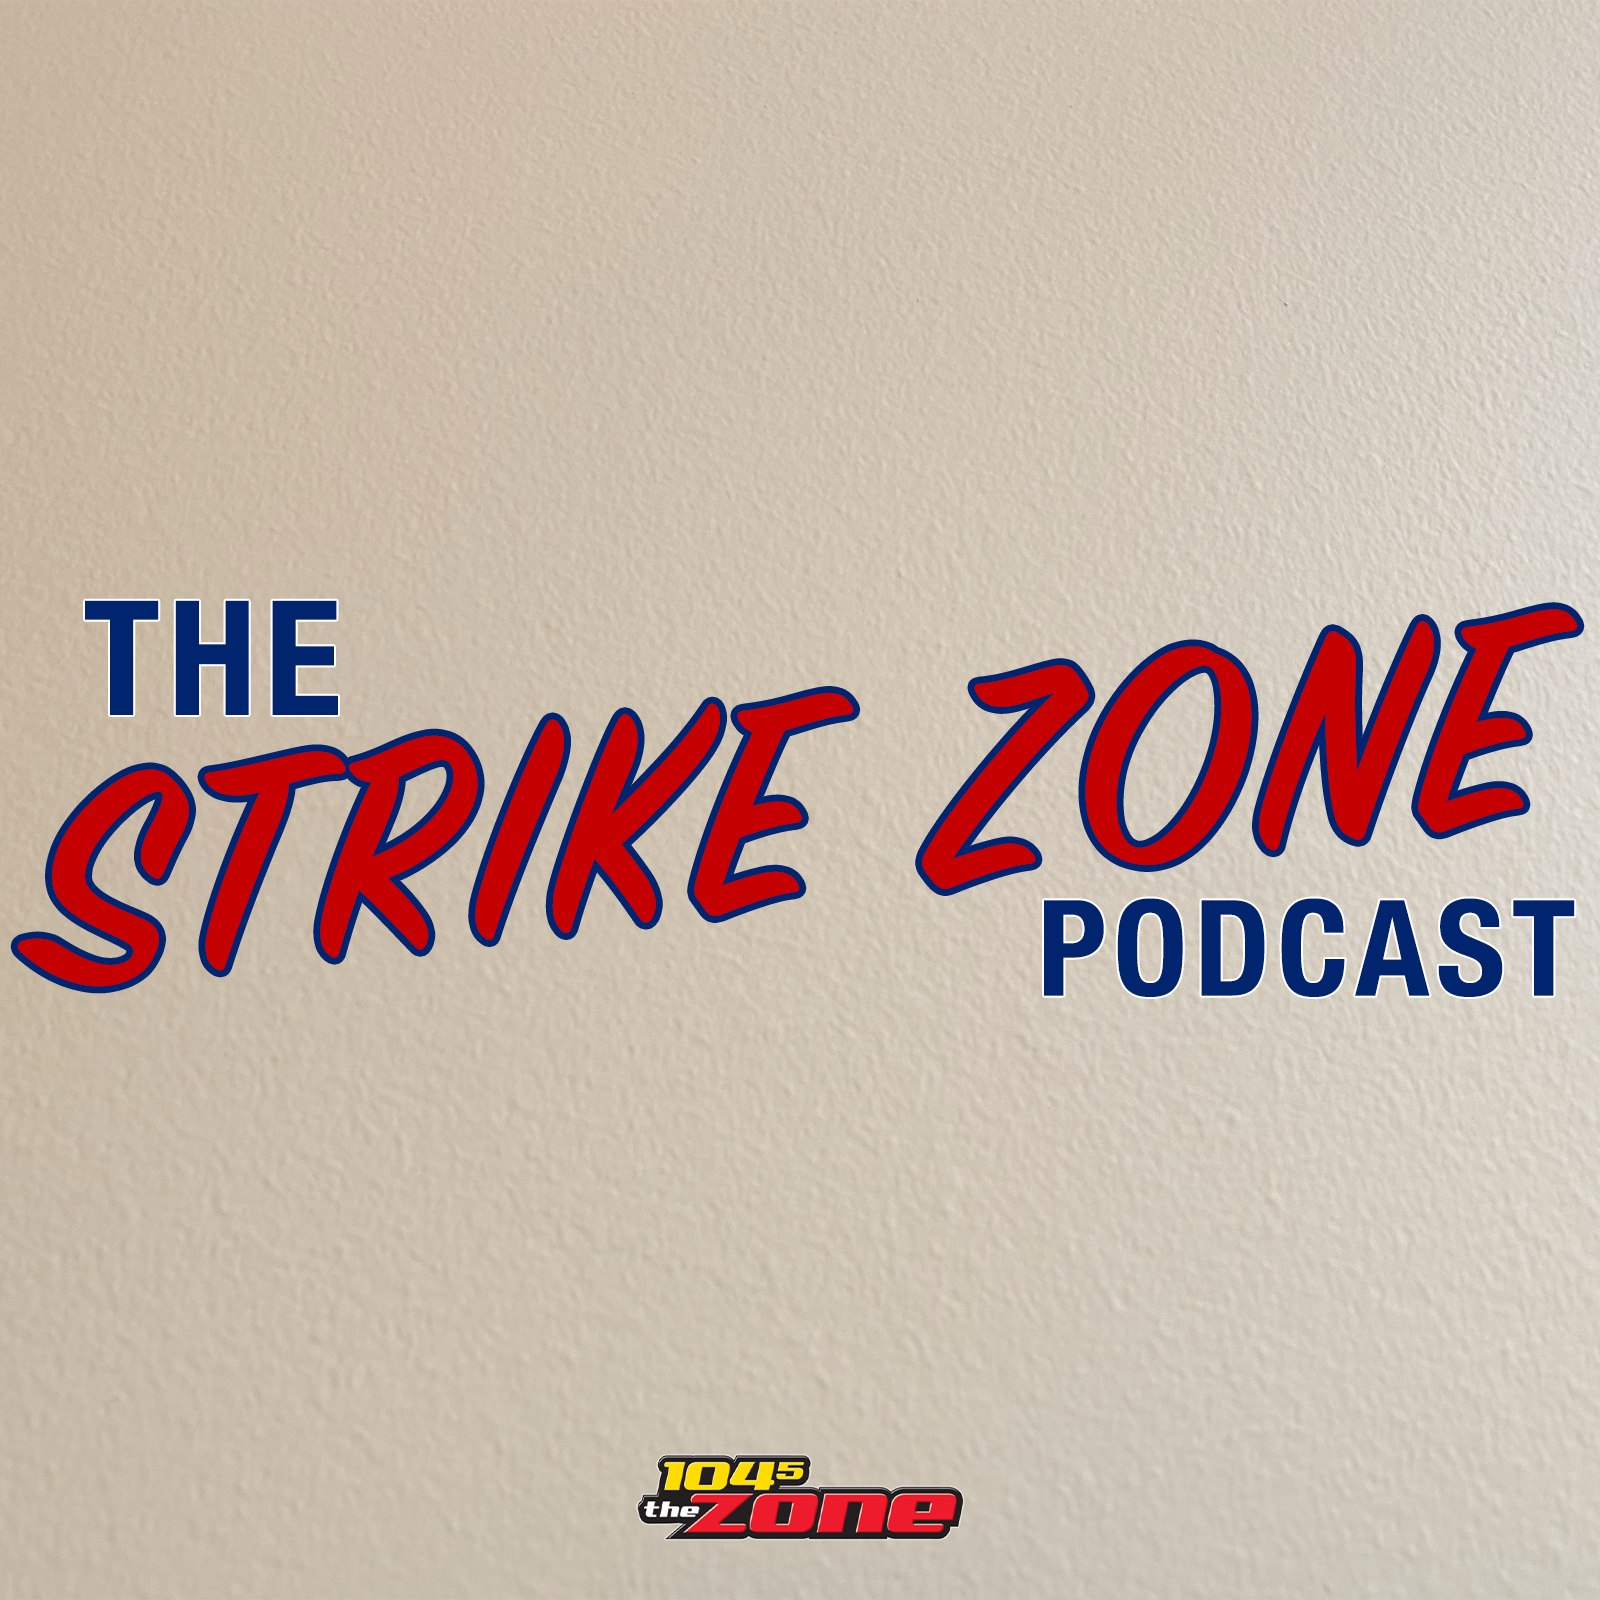 Nolensville, MLB Trade Deadline, Booster the Rooster, and a Baby, This Show Had it All | The Strike Zone